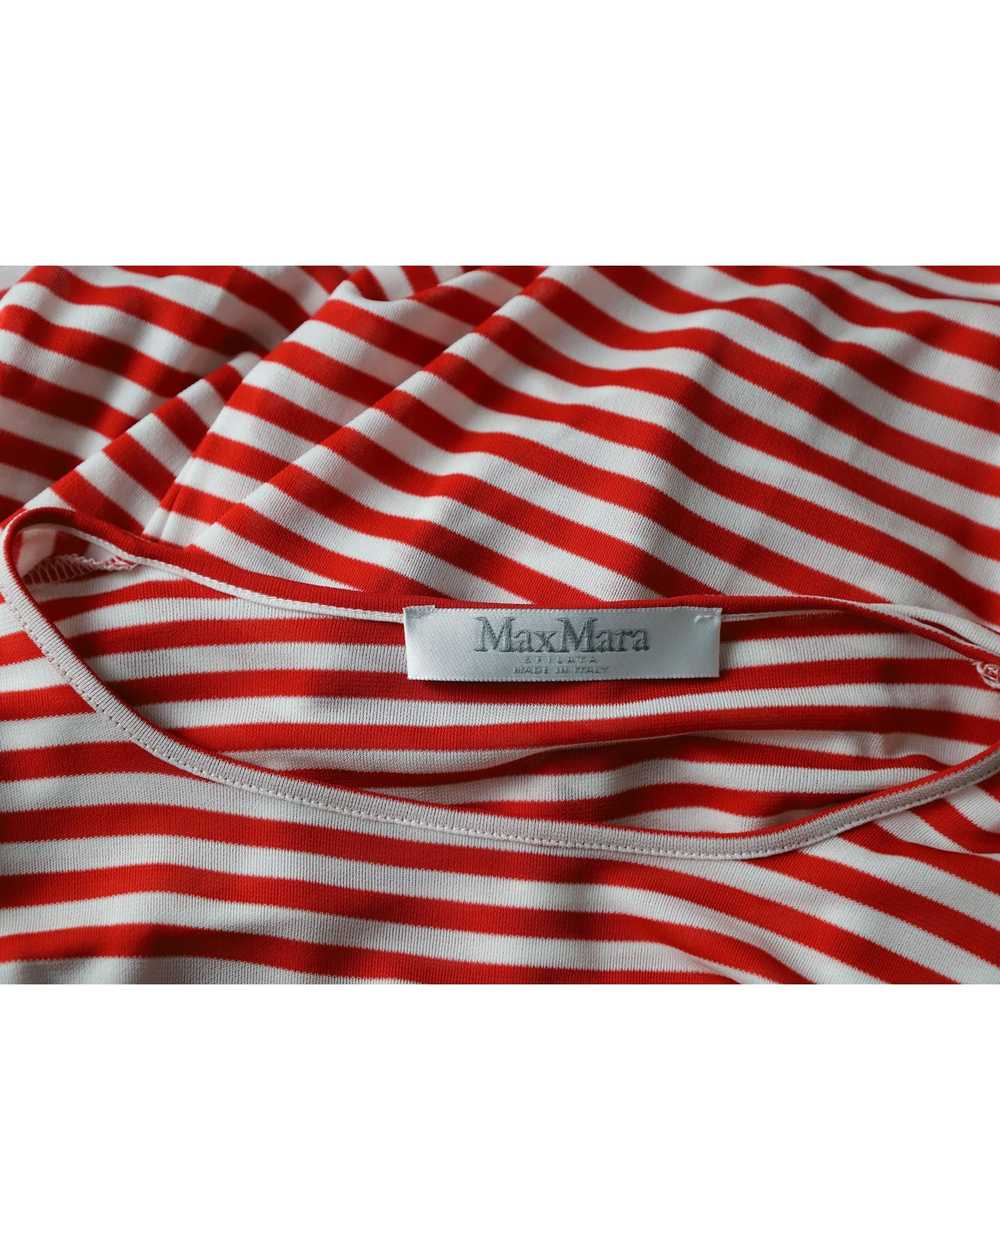 Max Mara Striped Long Sleeve Top in Red and White… - image 4